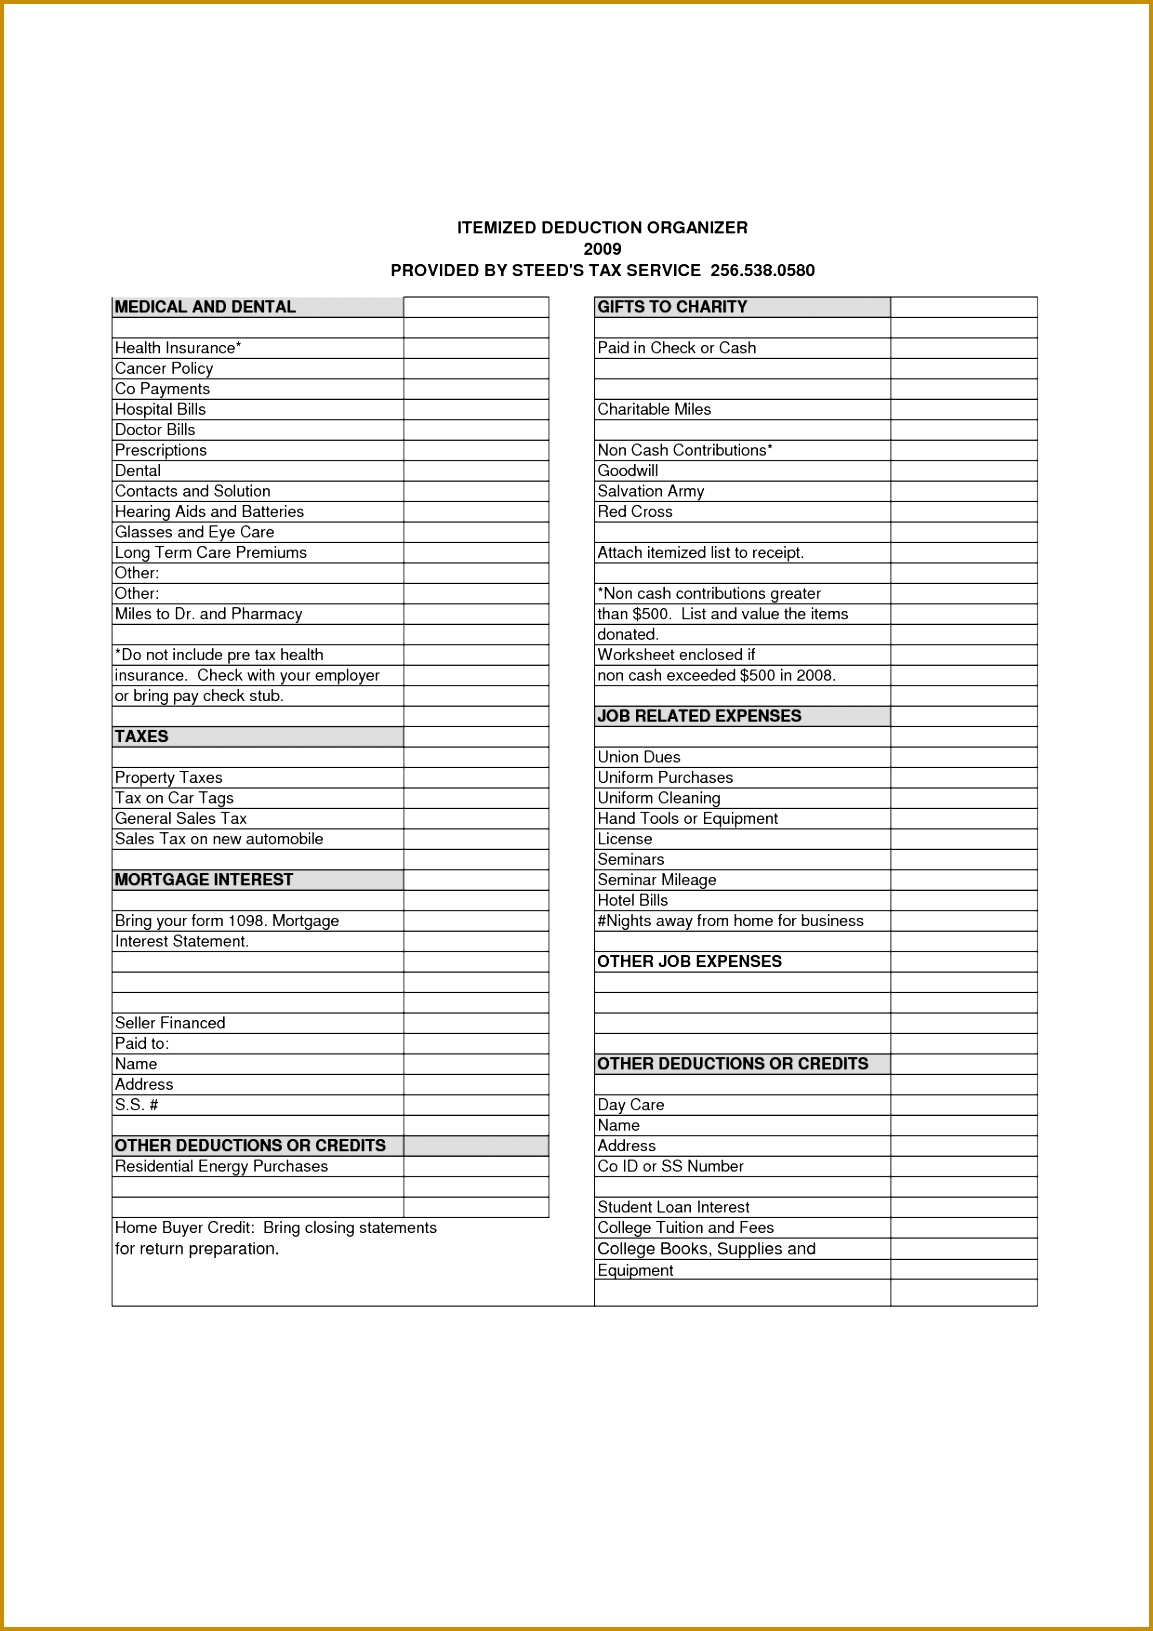 Itemized Deductions Worksheet Line 29 Worksheets for all Download and Worksheets 11531631